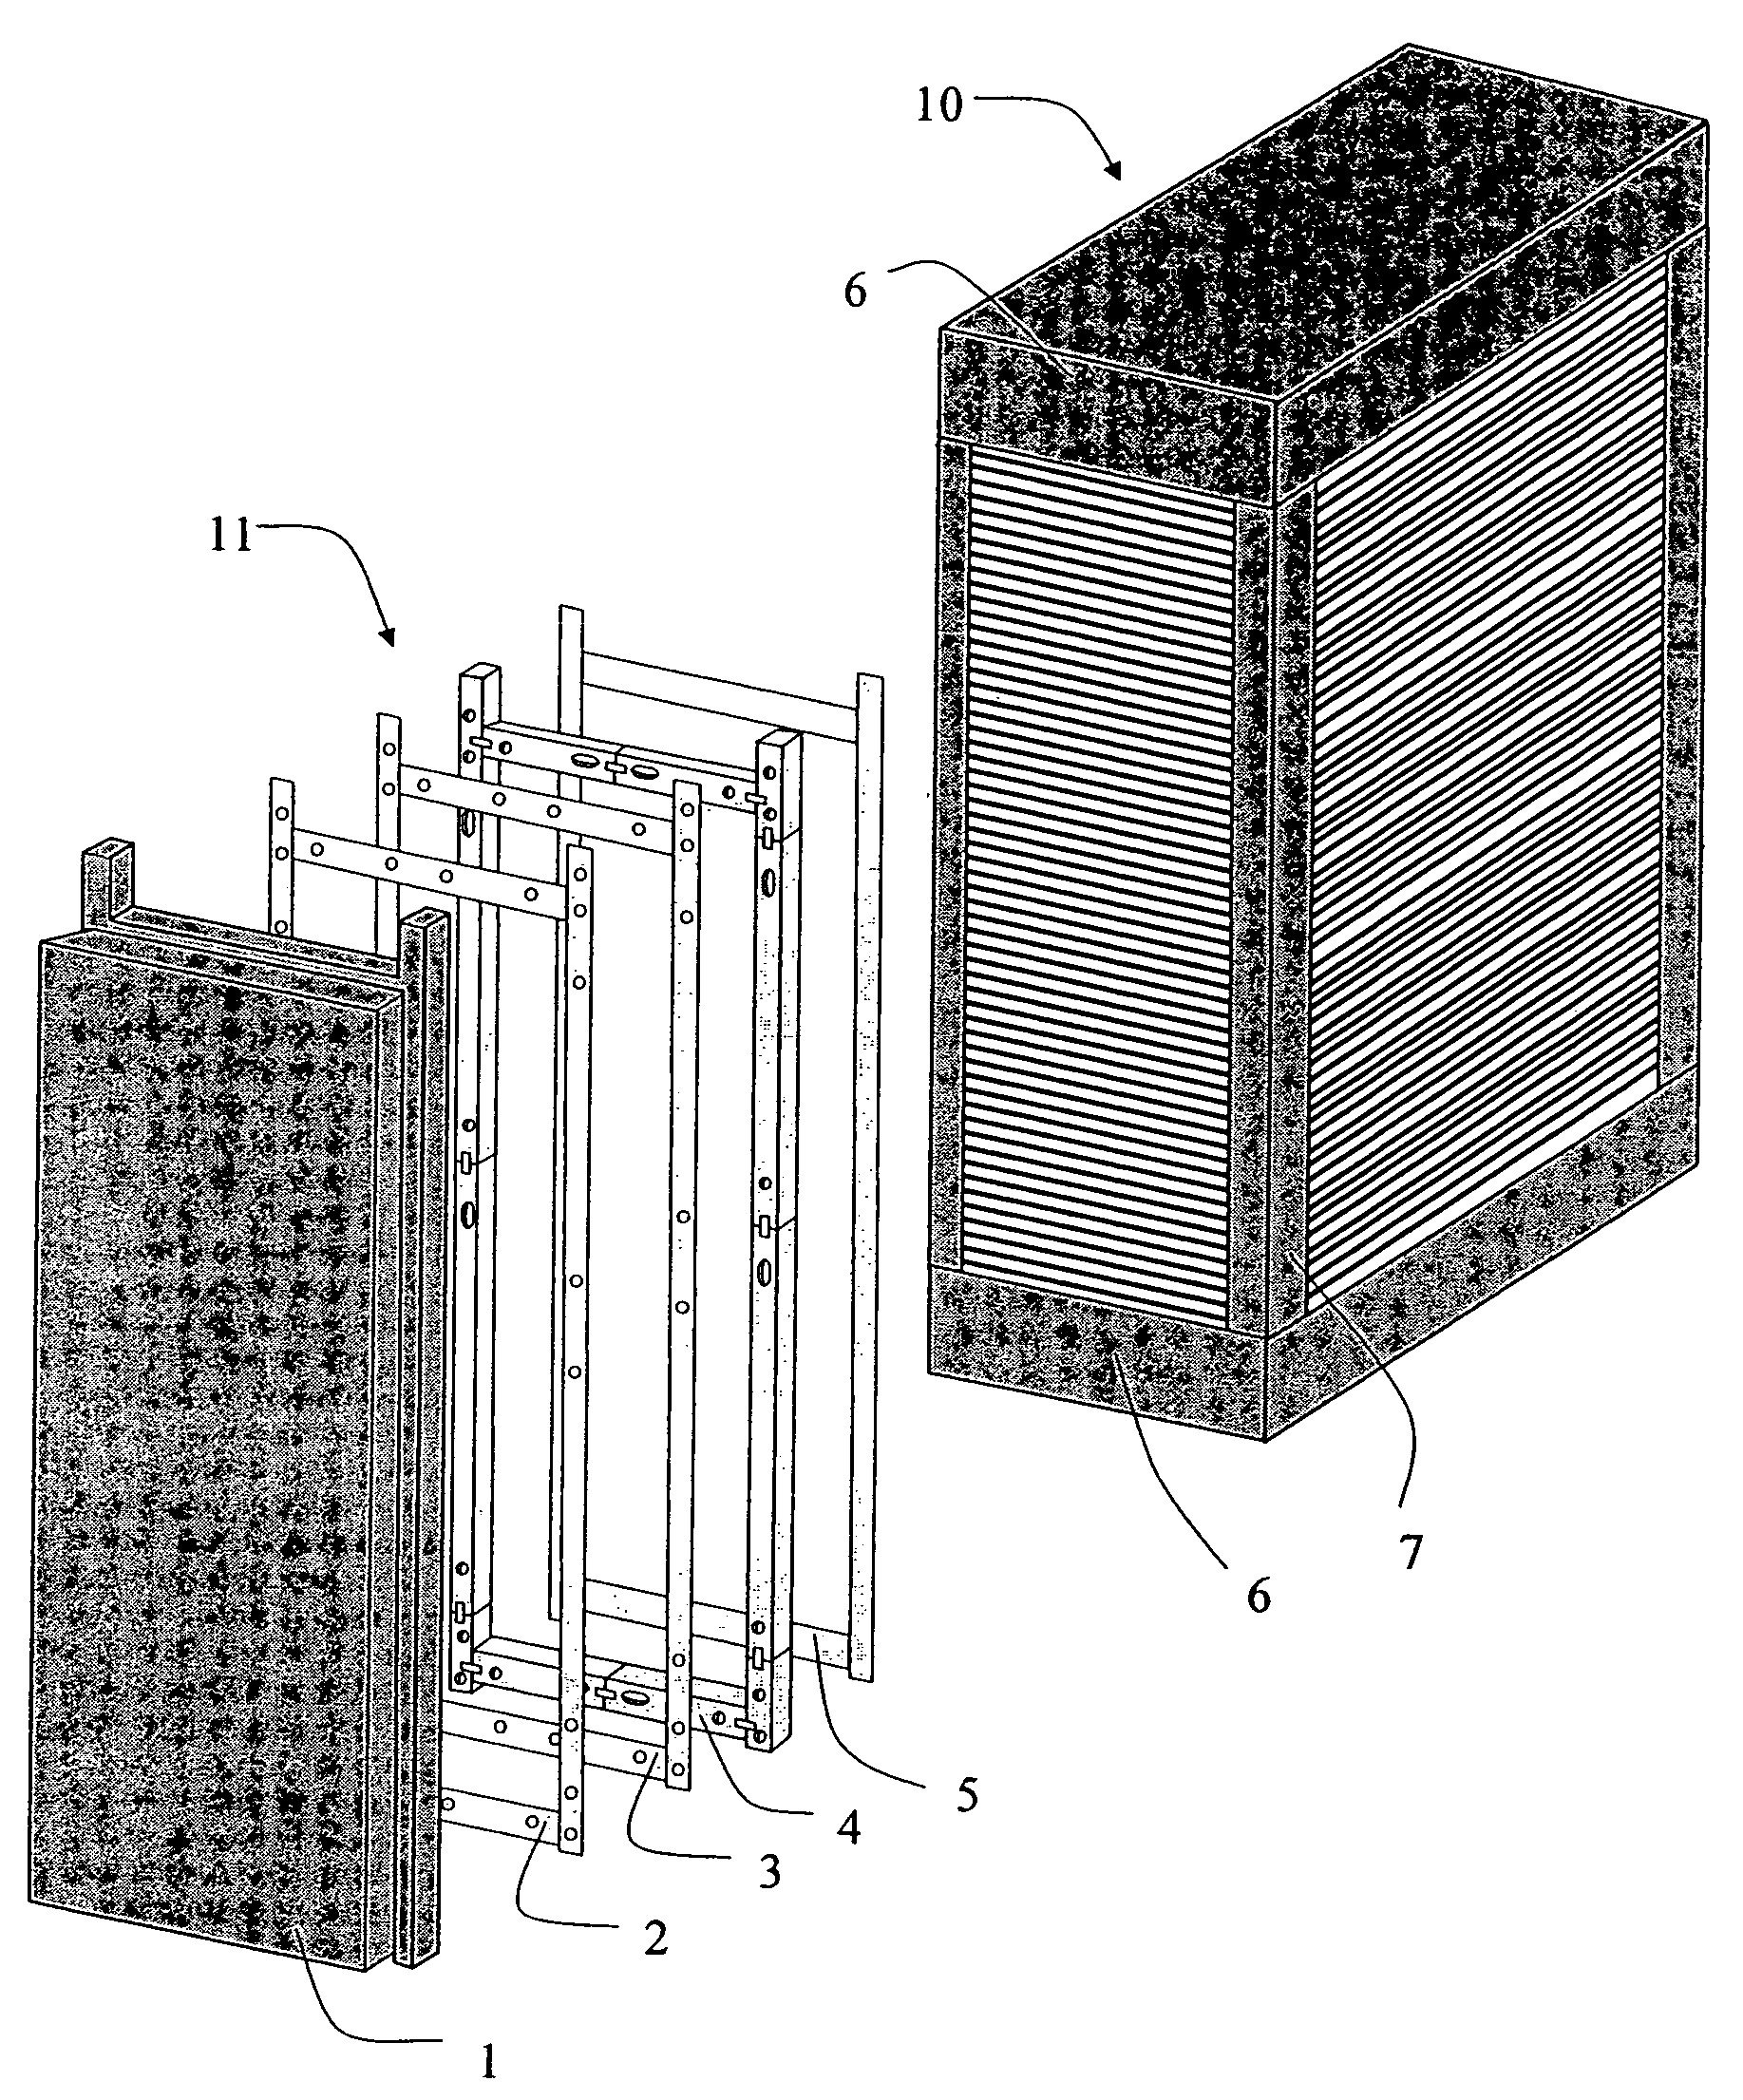 Manifold gasket accommodating differential movement of fuel cell stack